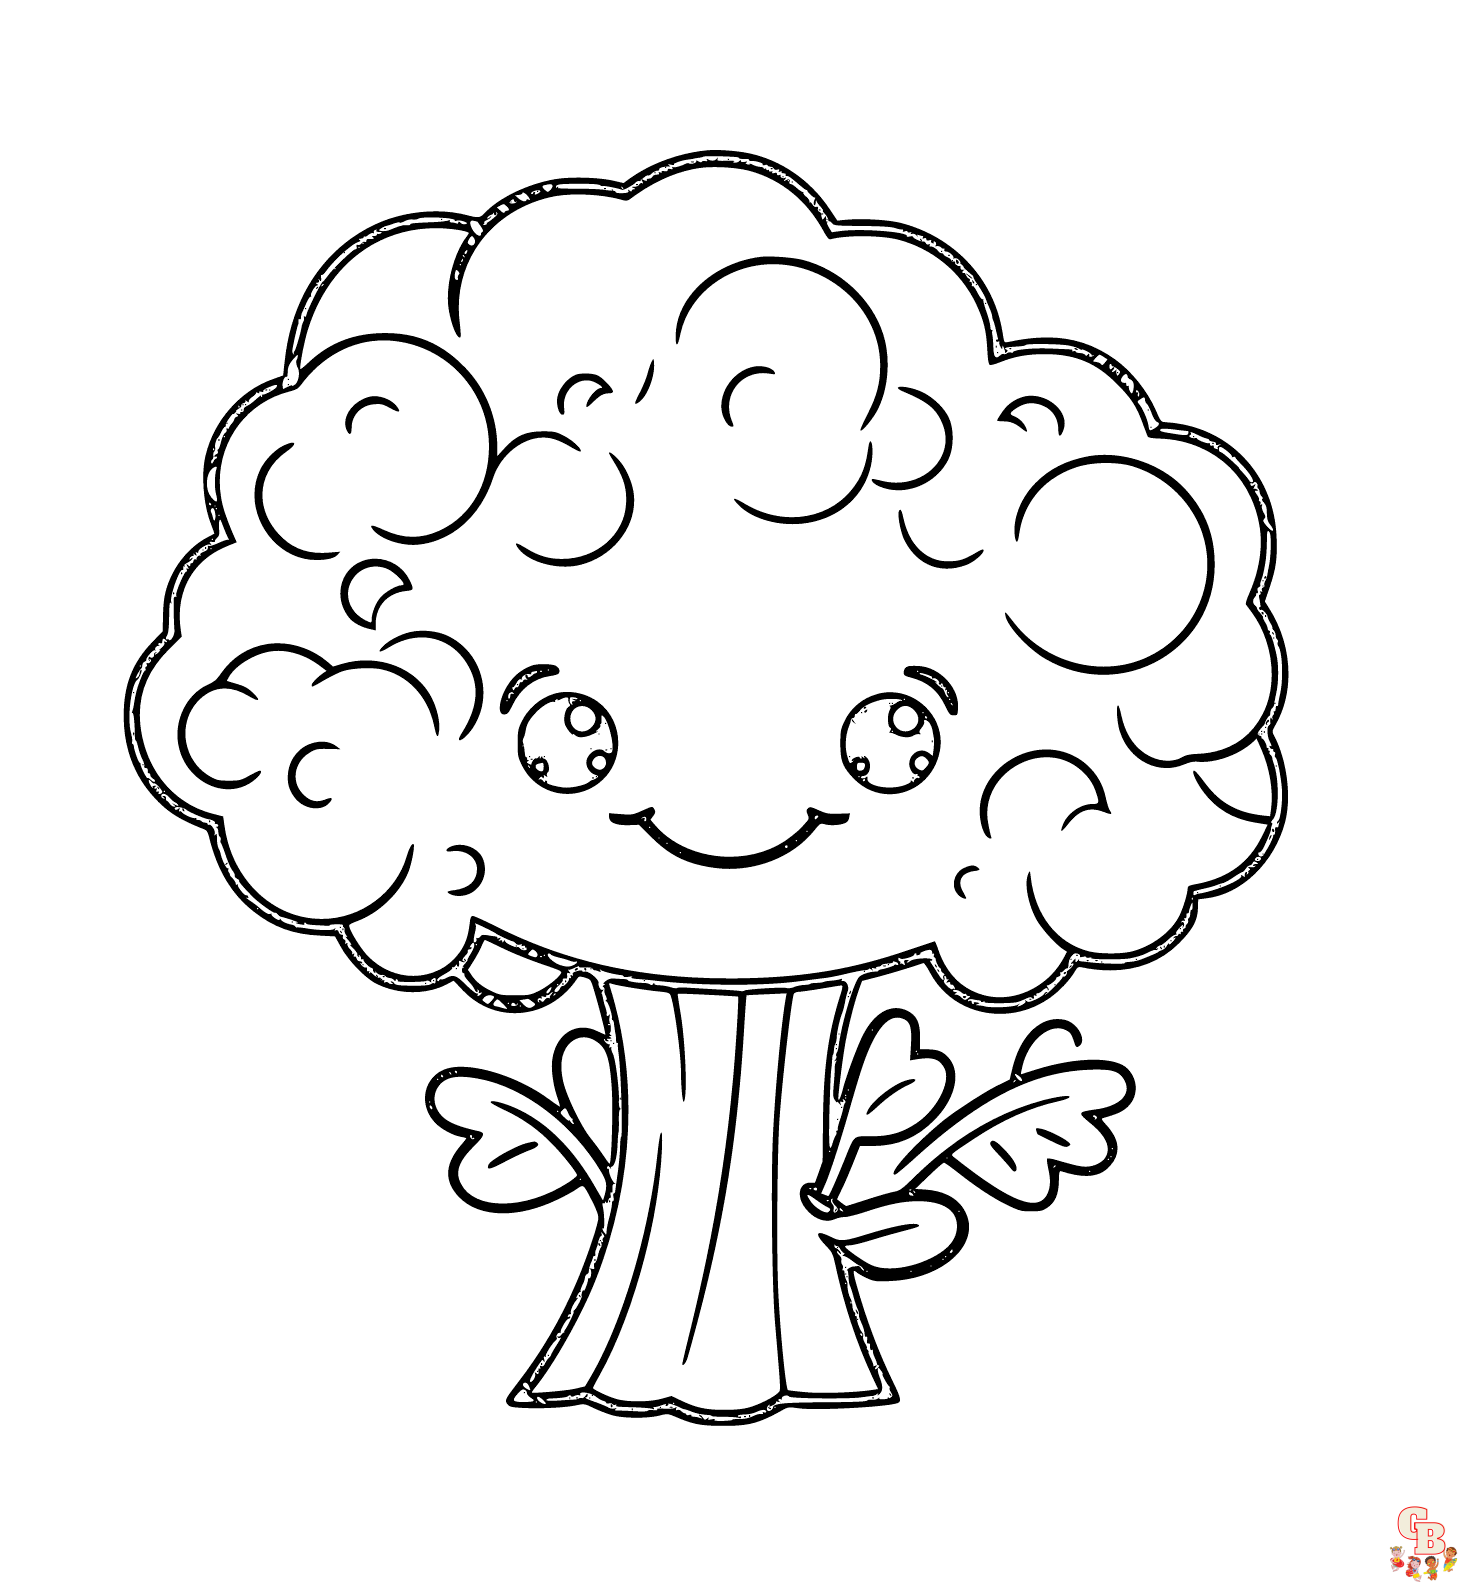 Broccoli coloring pages to print